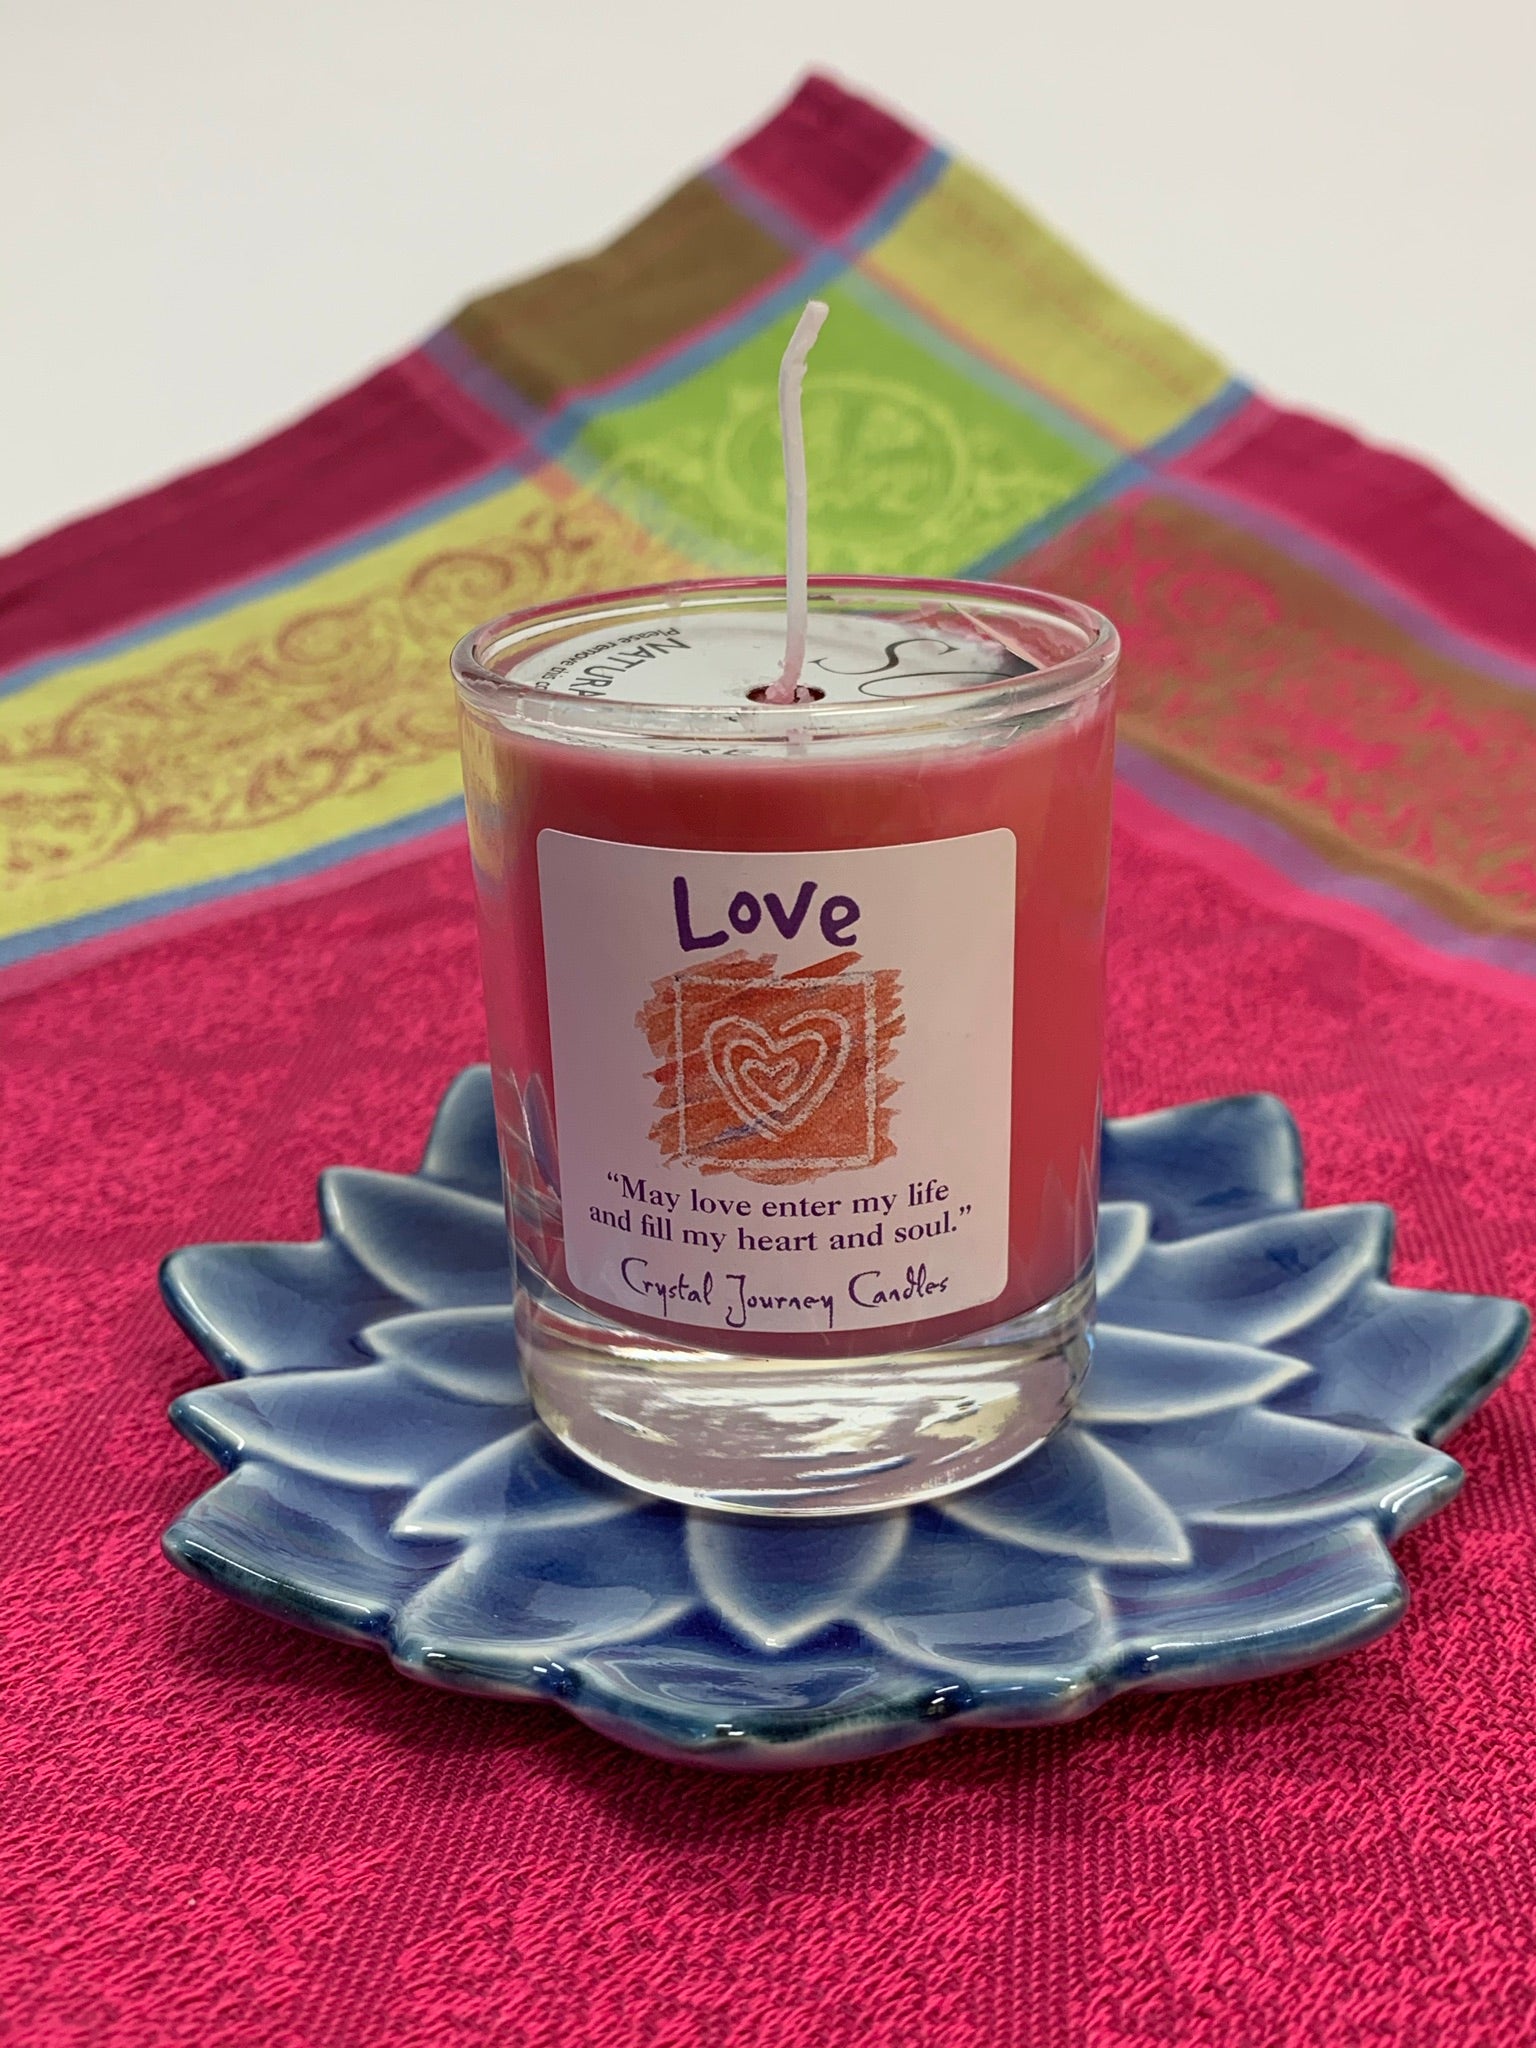 Handcrafted pink votive candle in a glass holder. The wax is soy-based (no paraffin) and is also vegan. Wicks are made with paper and cotton only. It comes with an attractive label stating the intention/purpose of the candle, "Love," and an affirmation for your use: "May love enter my life and fill my heart and soul"